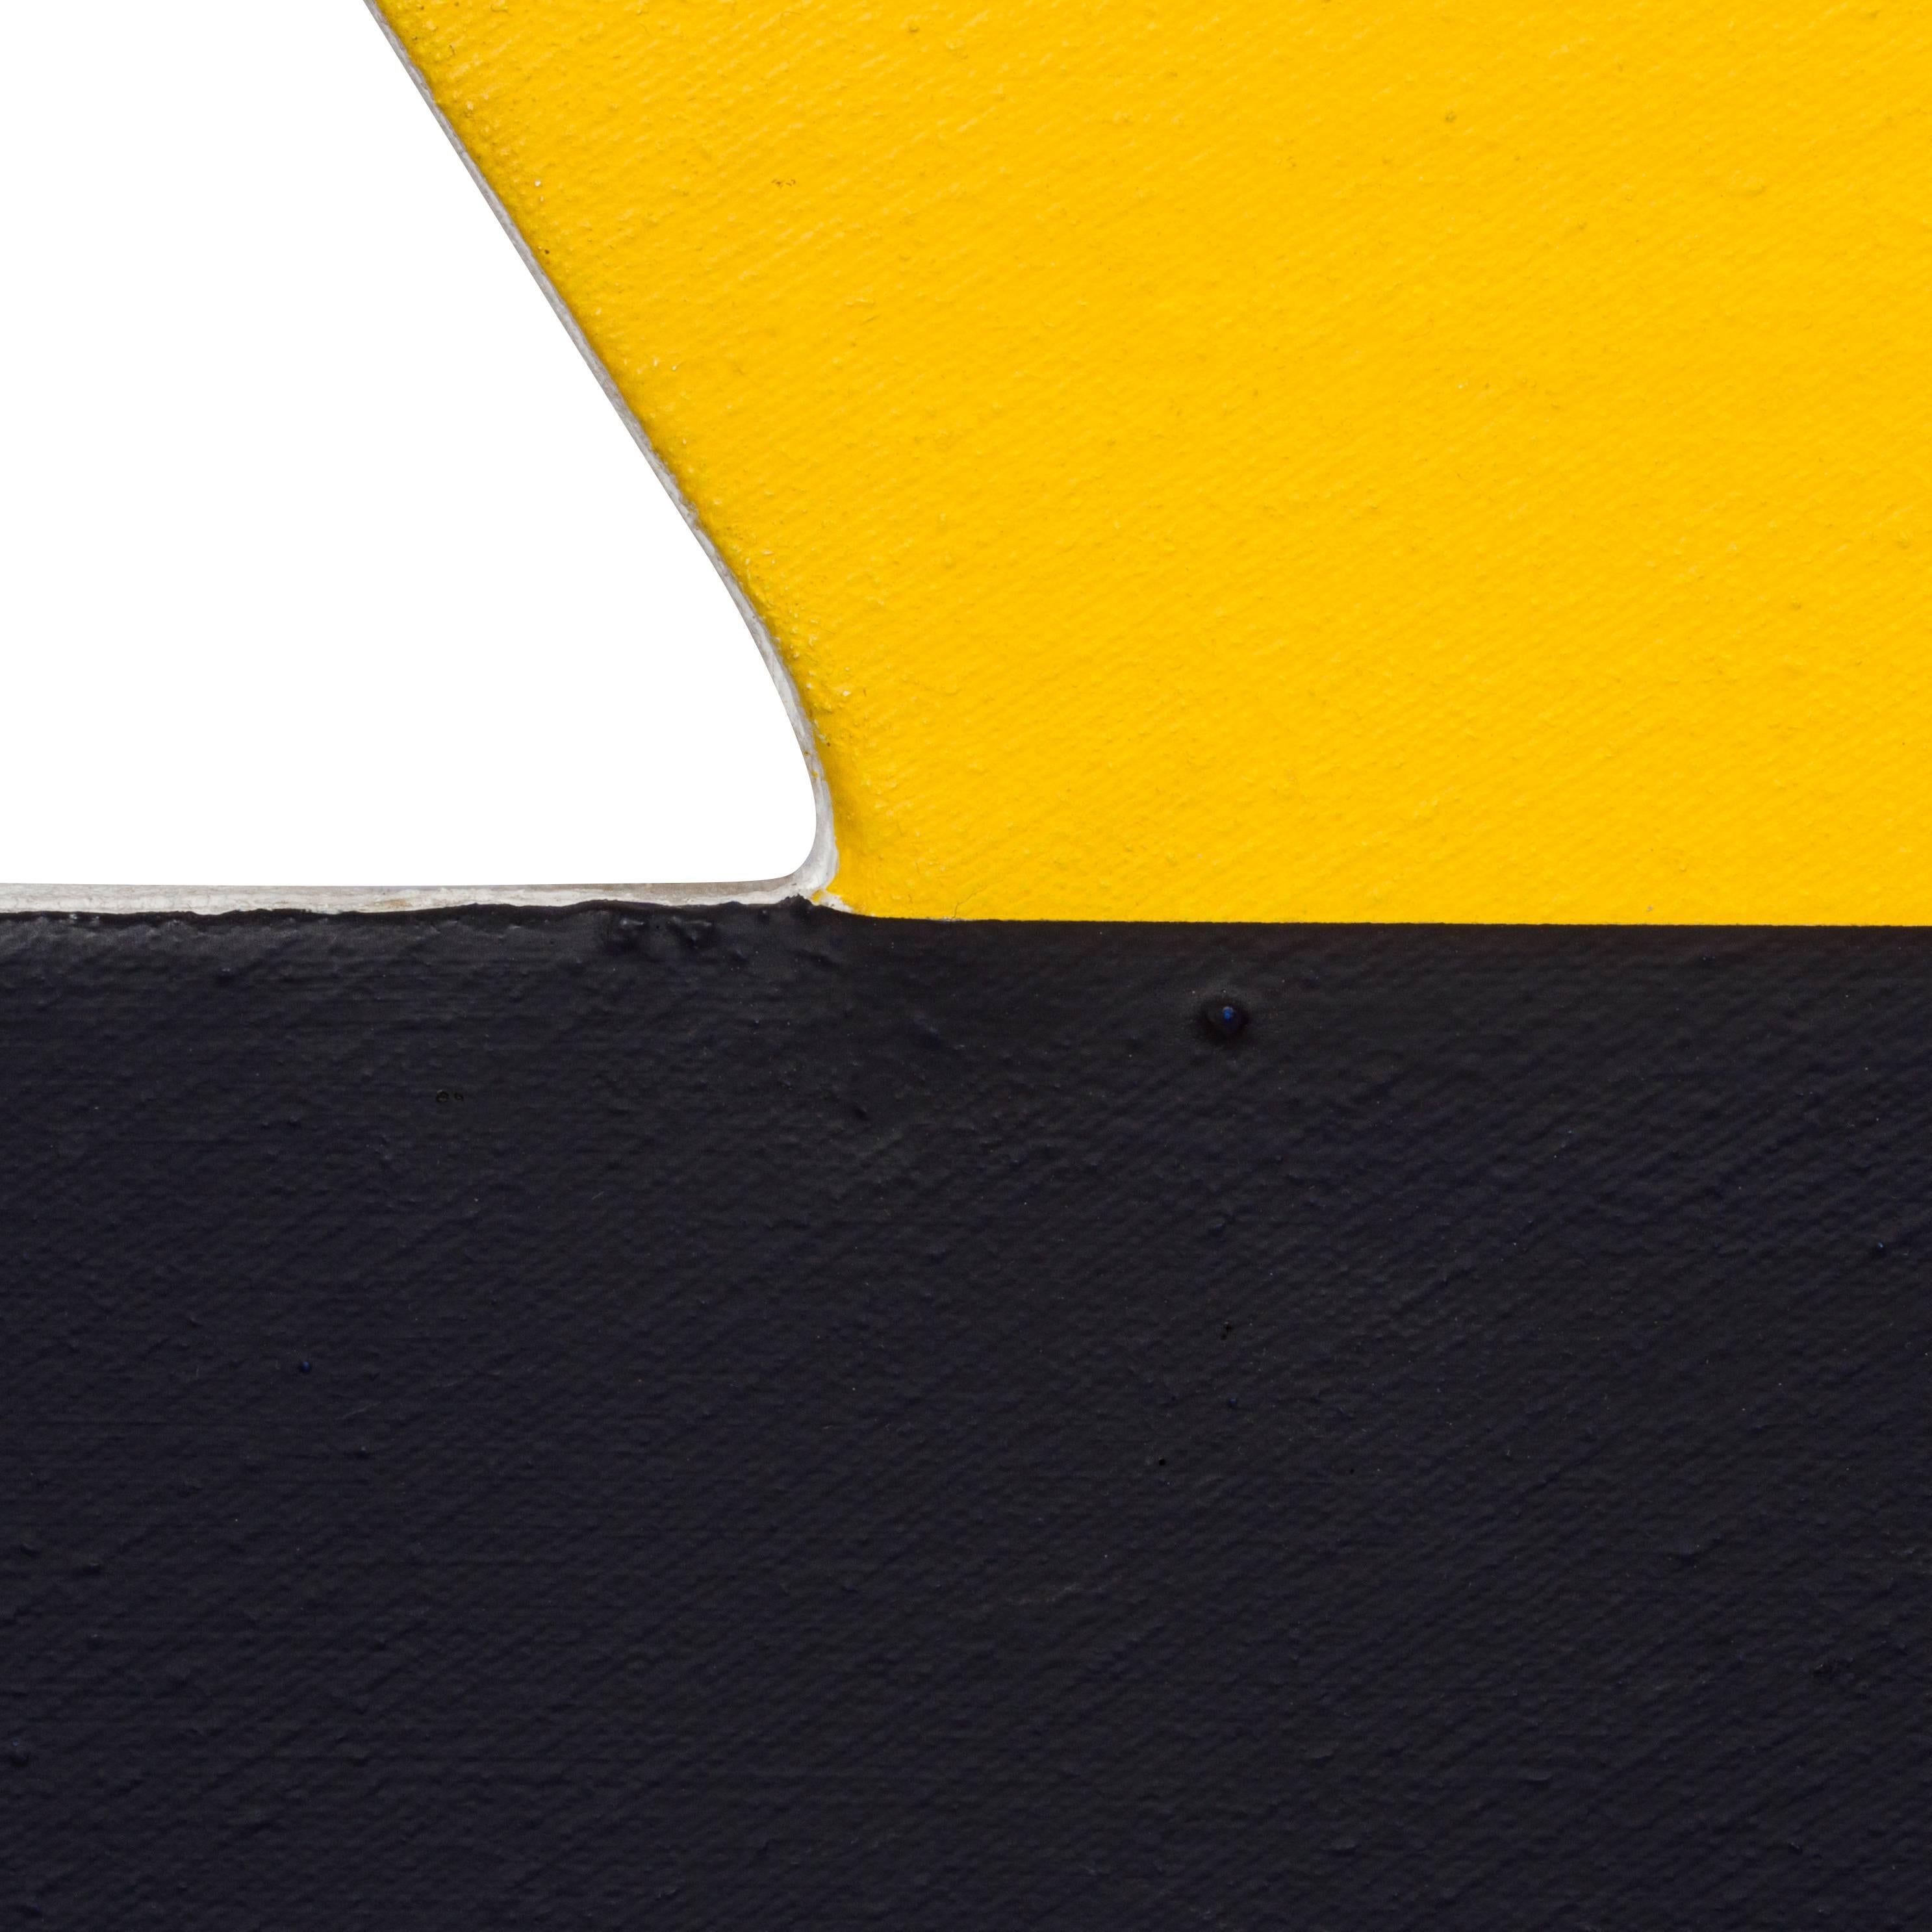 1980s Graphic Black and Yellow Abstract Painting In Good Condition For Sale In Pasadena, CA